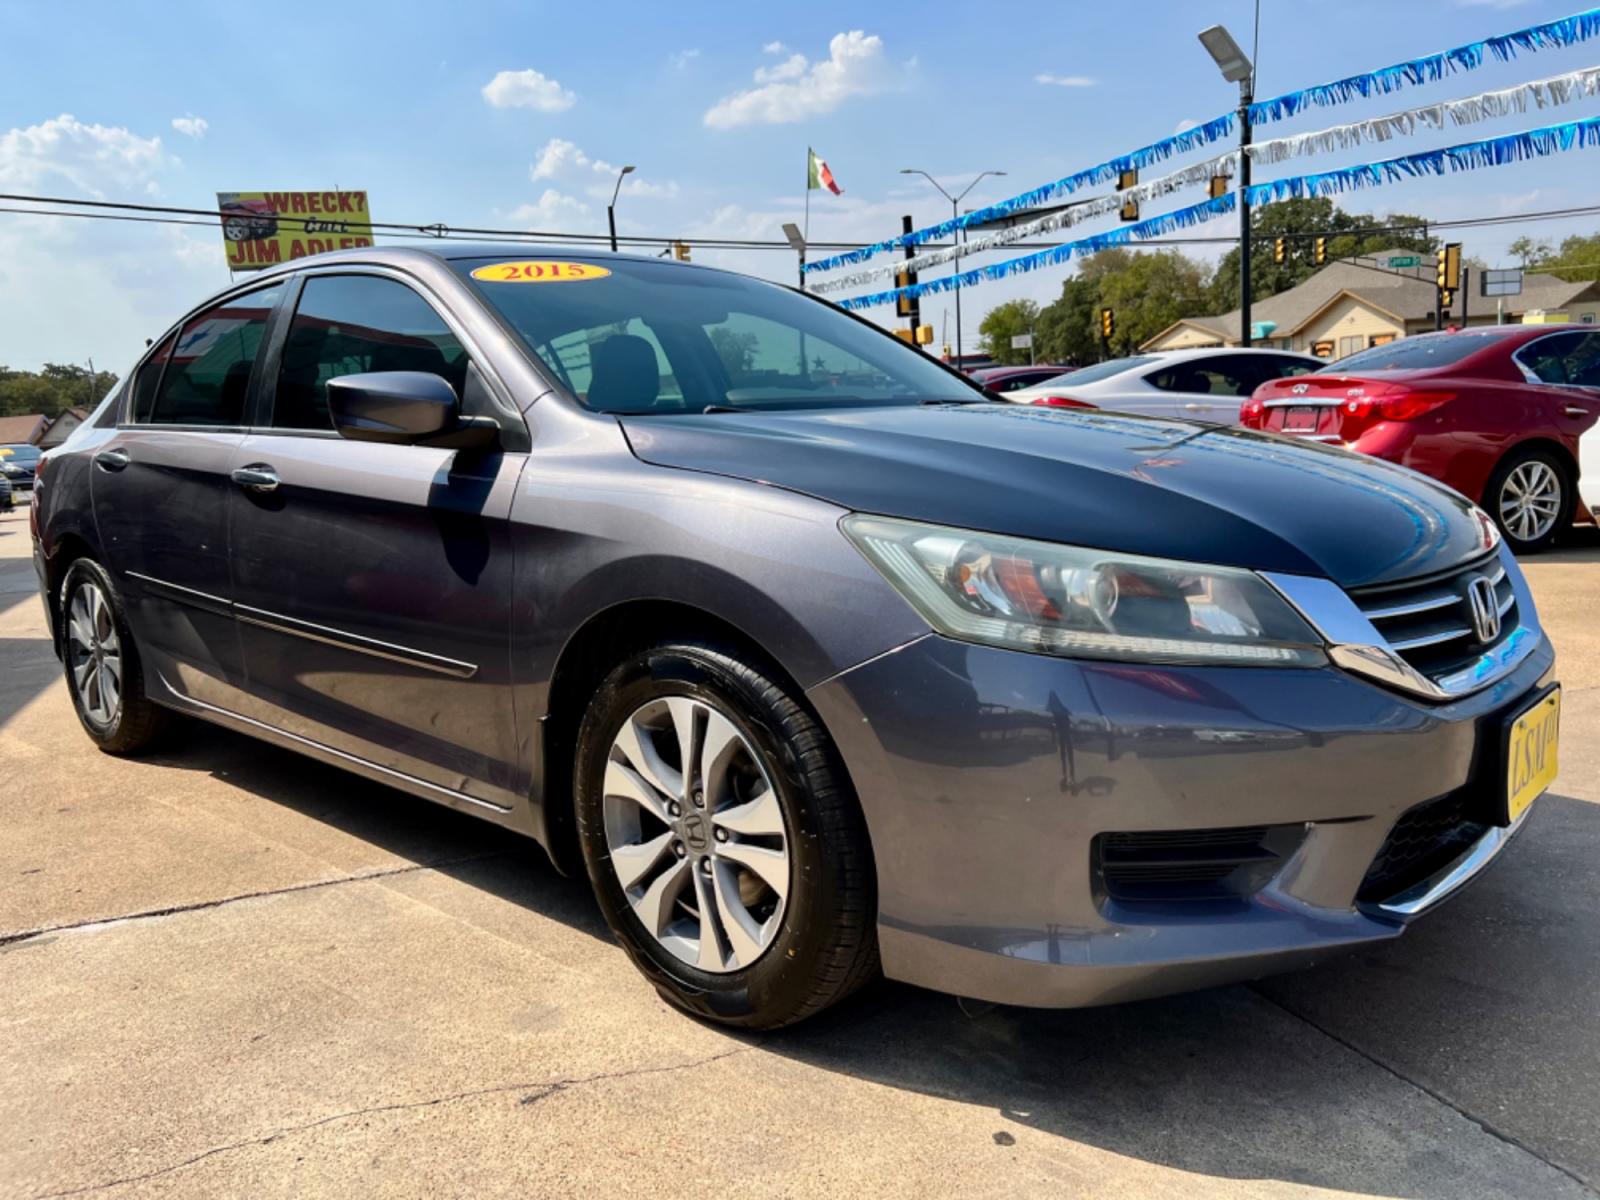 2015 SILVER HONDA ACCORD (1HGCR2F36FA) , located at 5900 E. Lancaster Ave., Fort Worth, TX, 76112, (817) 457-5456, 0.000000, 0.000000 - This is a 2015 HONDA ACCORD 4 DOOR SEDAN that is in excellent condition. There are no dents or scratches. The interior is clean with no rips or tears or stains. All power windows, door locks and seats. Ice cold AC for those hot Texas summer days. It is equipped with a CD player, AM/FM radio, AUX por - Photo #8